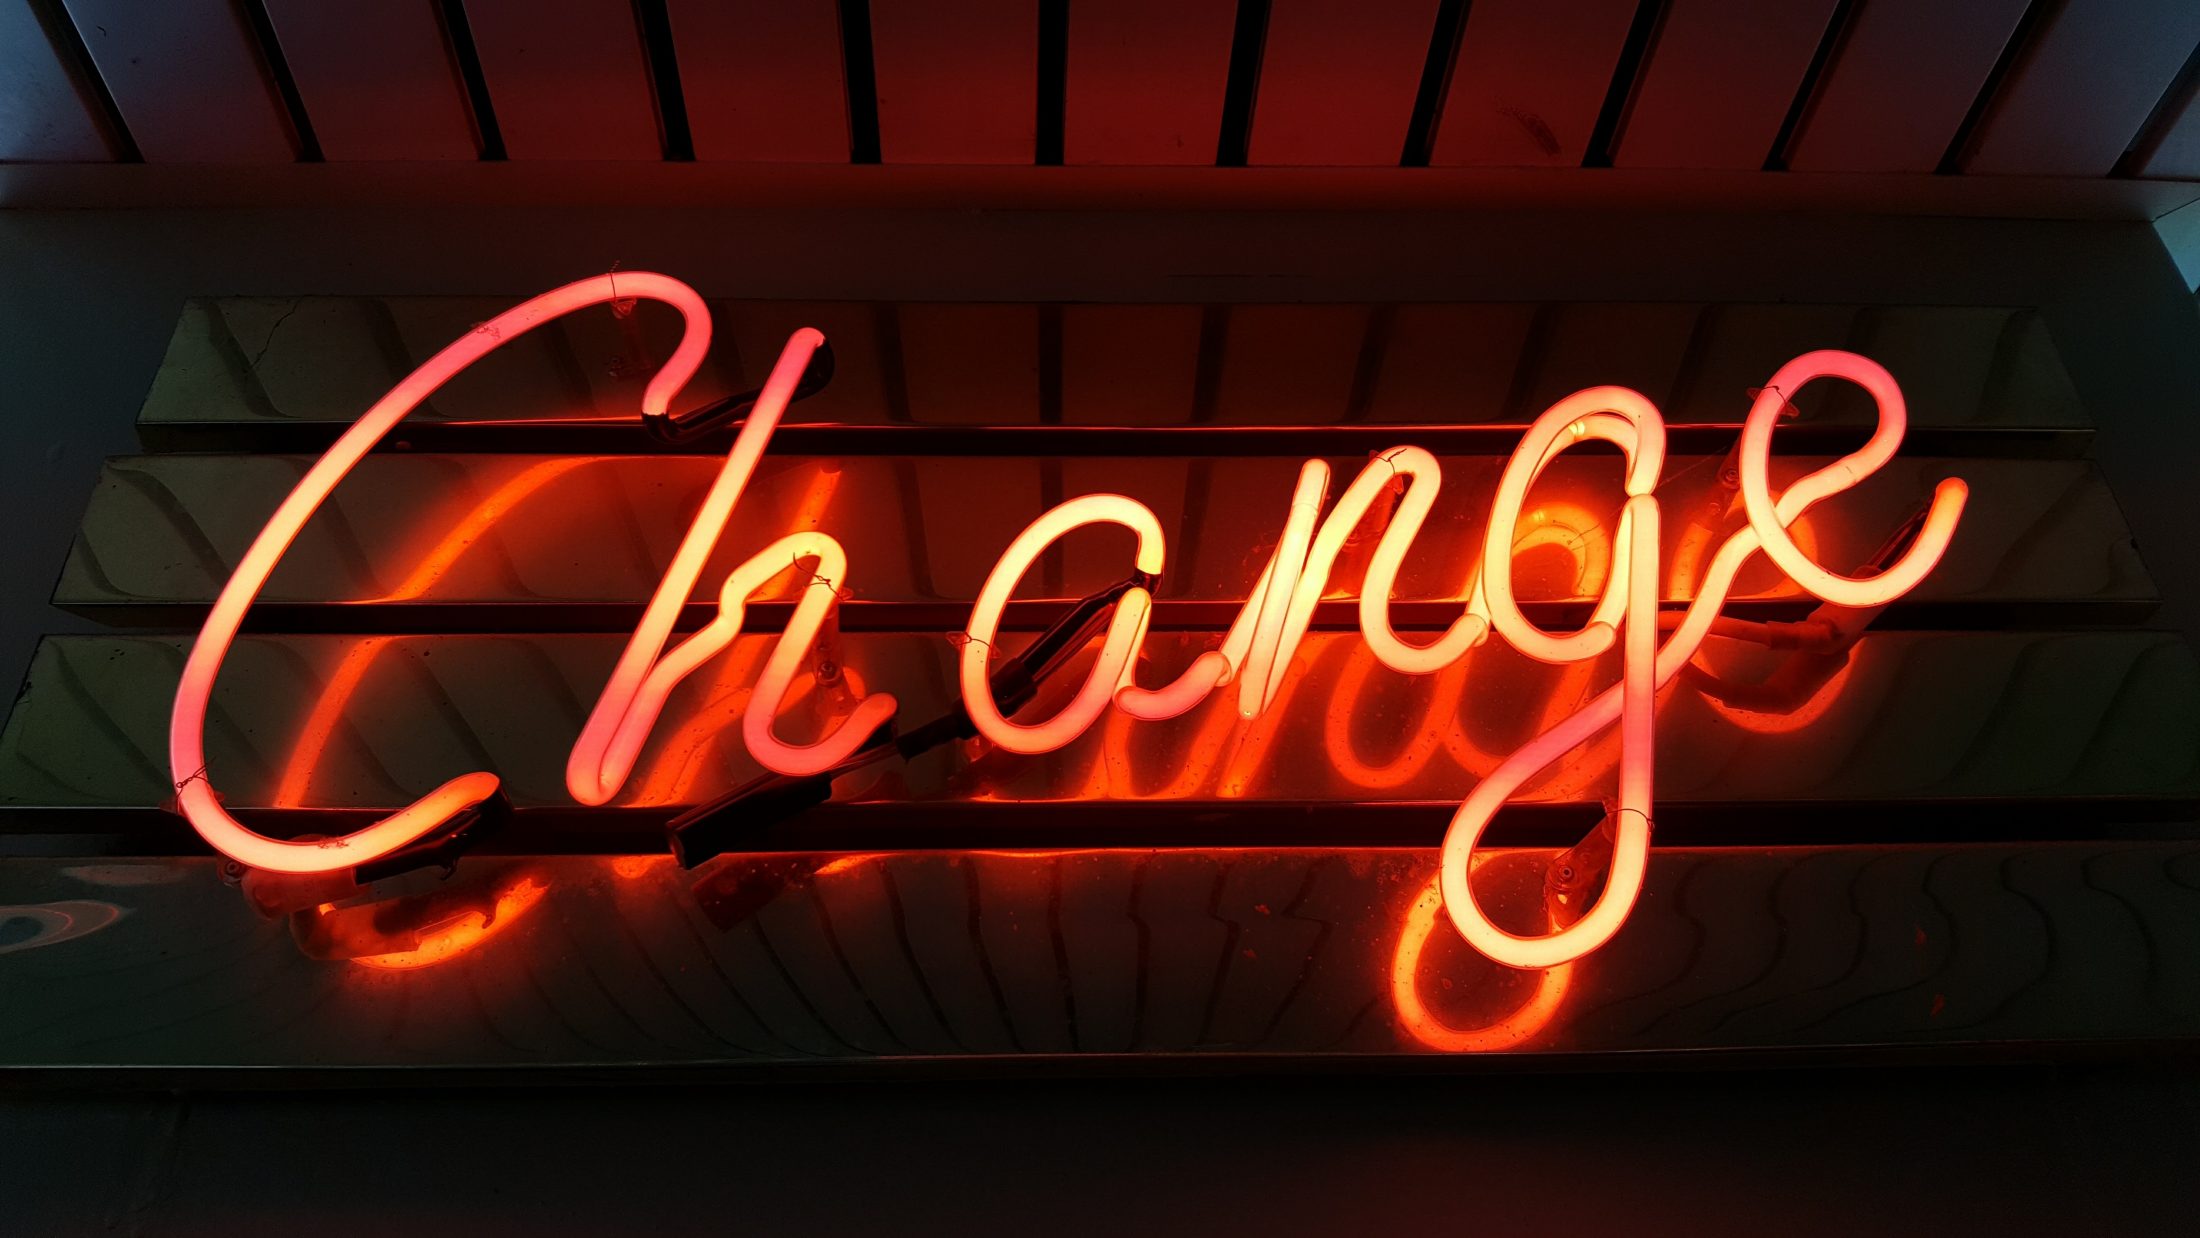 What is your tipping point for change? 5